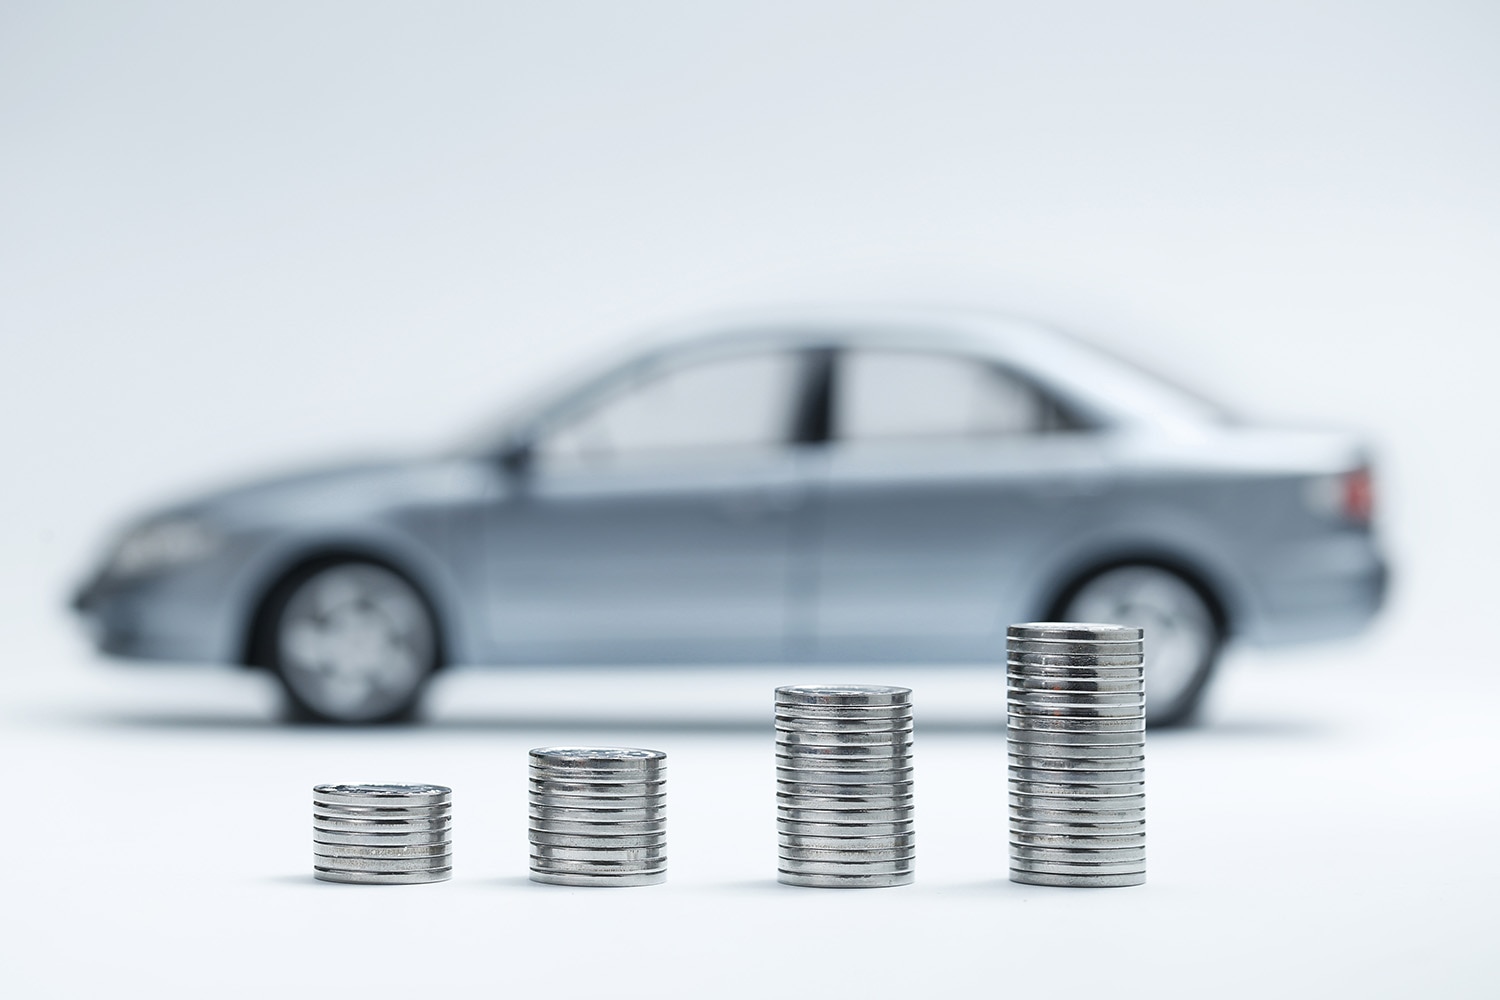 Coin stacks in front of blurred-out car in profile, background